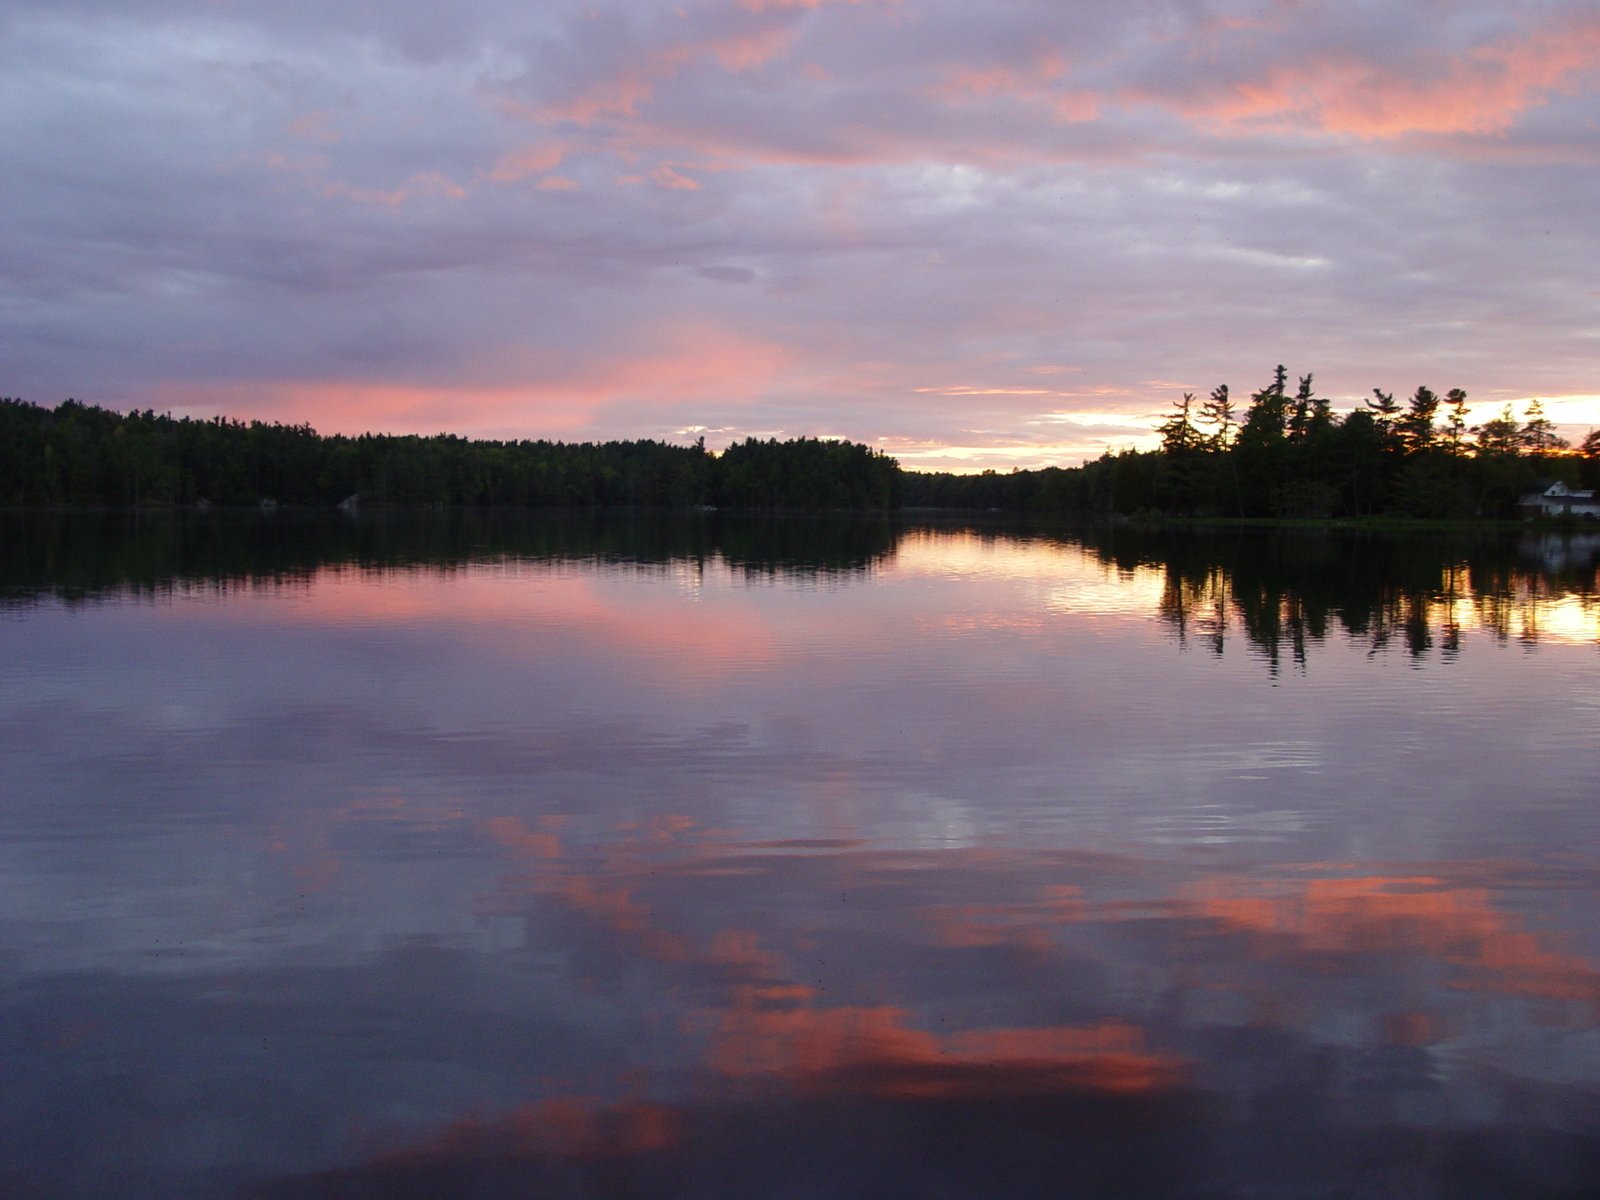 an image of the sunset at the lake